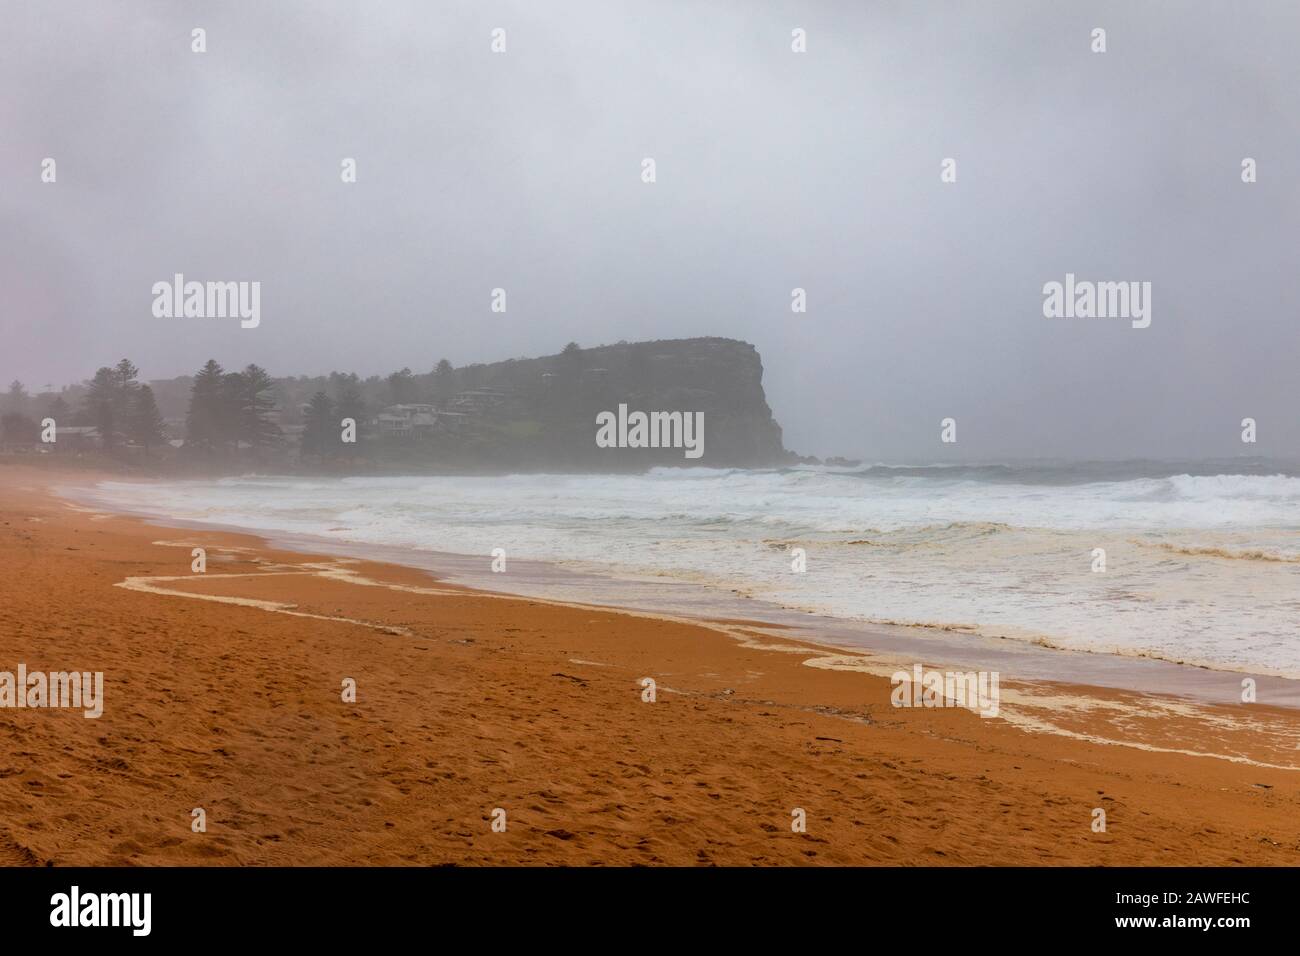 Wild storms and king tide surf conditions at Avalon Beach in Sydney during february storms,Australia Stock Photo